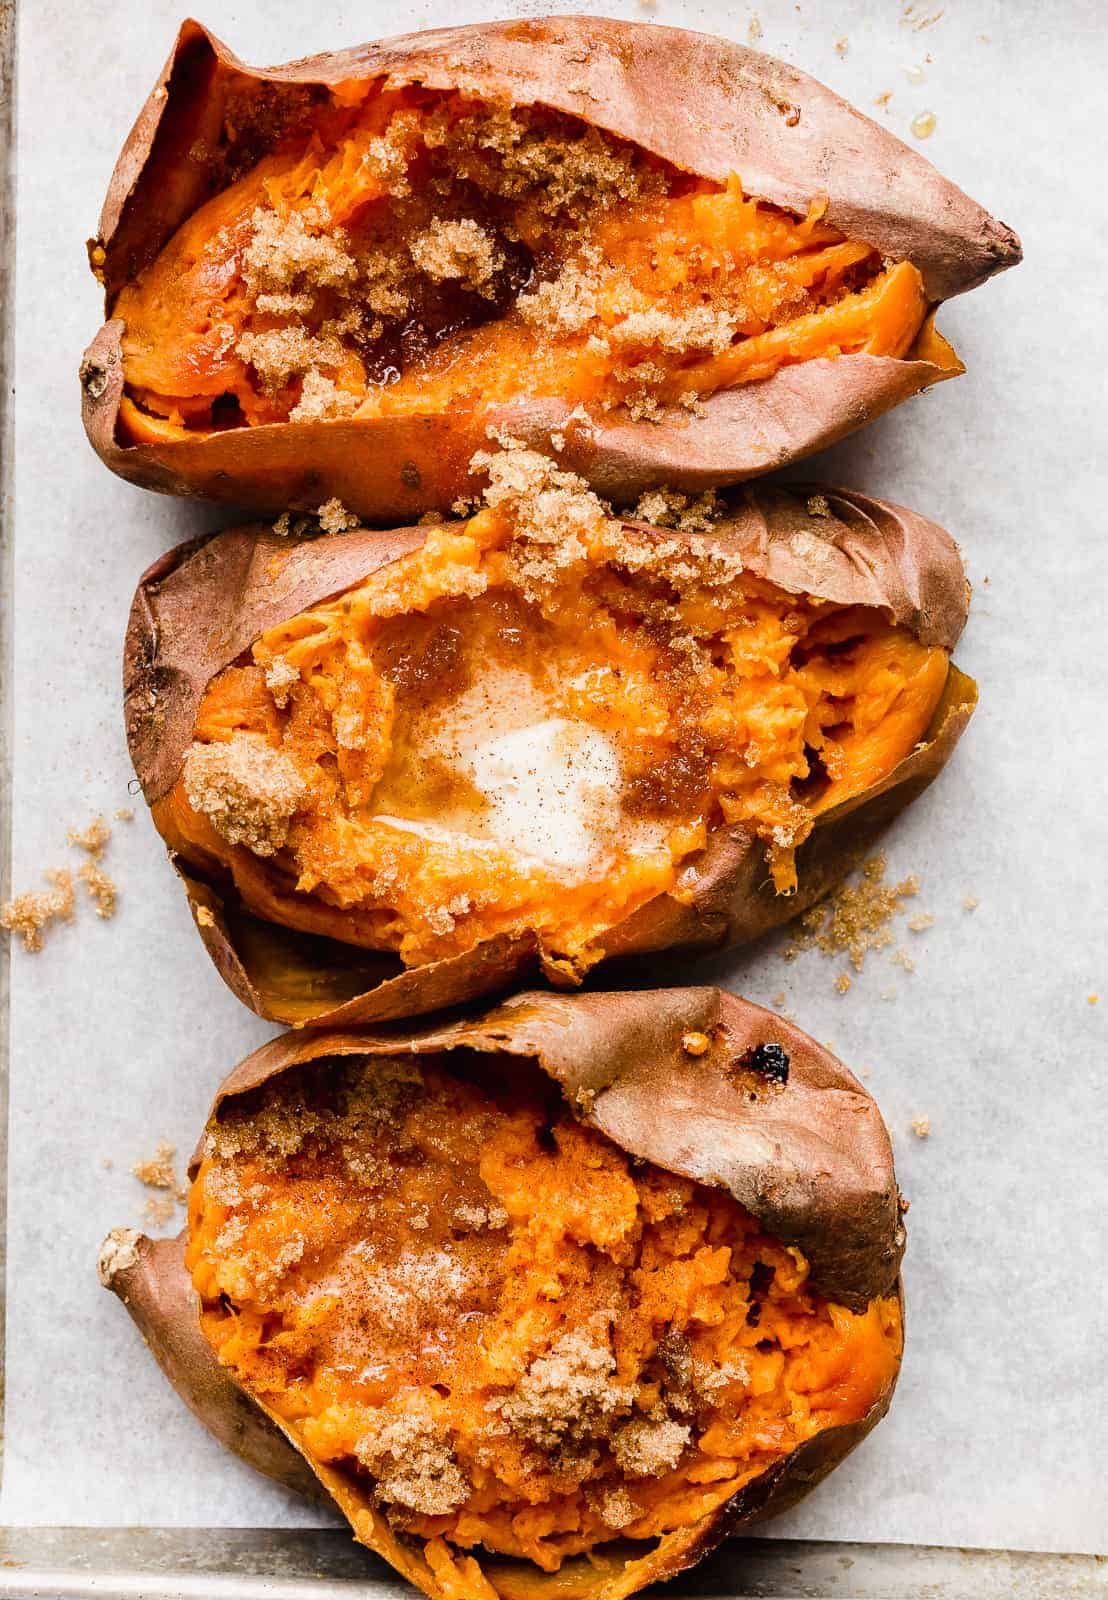 Three baked sweet potatoes topped with butter, brown sugar, and cinnamon.